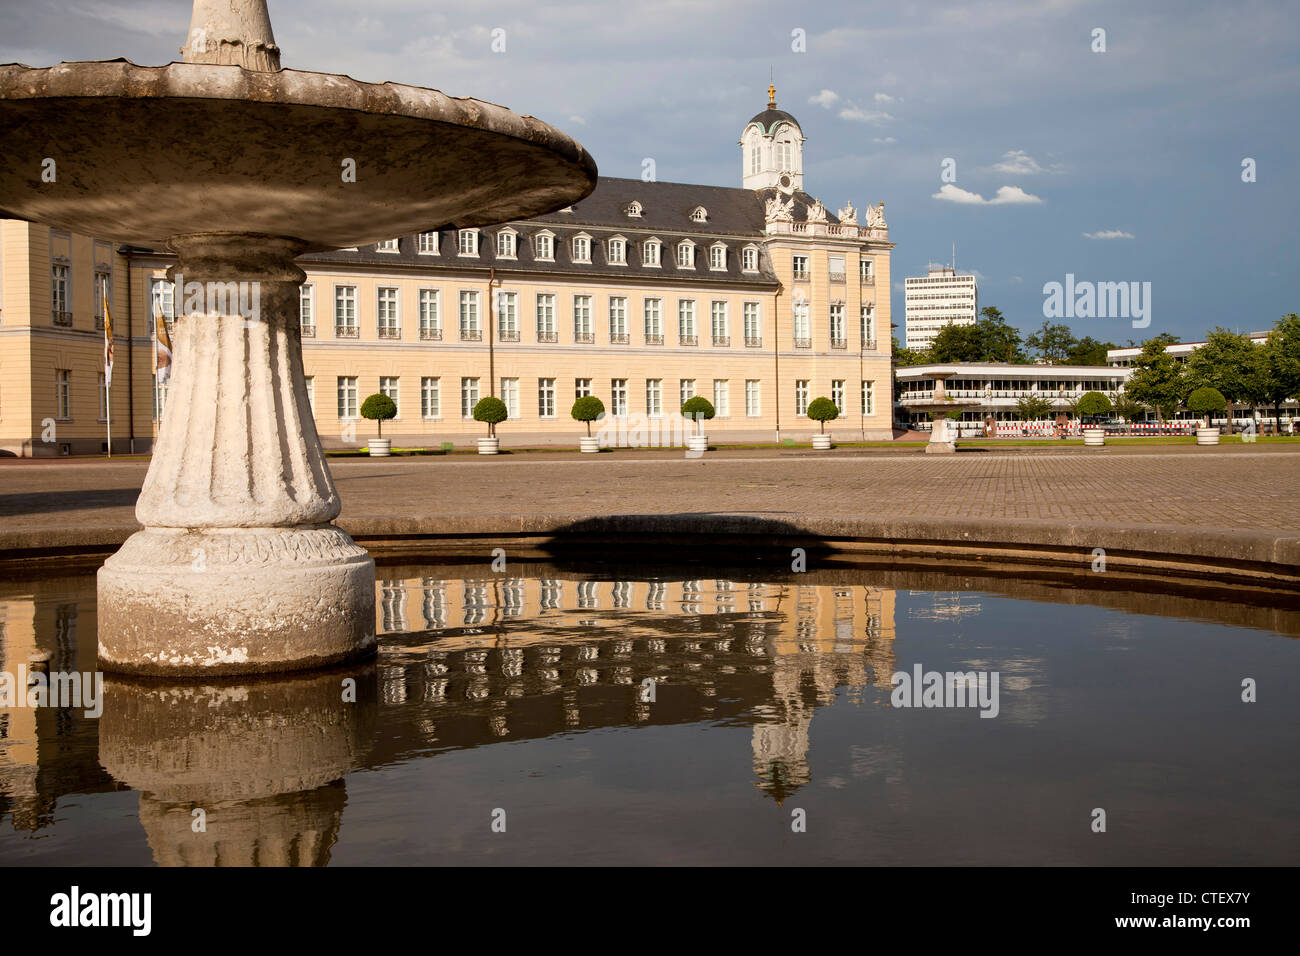 fountain and Karlsruhe Palace in Karlsruhe, Baden-Württemberg, Germany Stock Photo